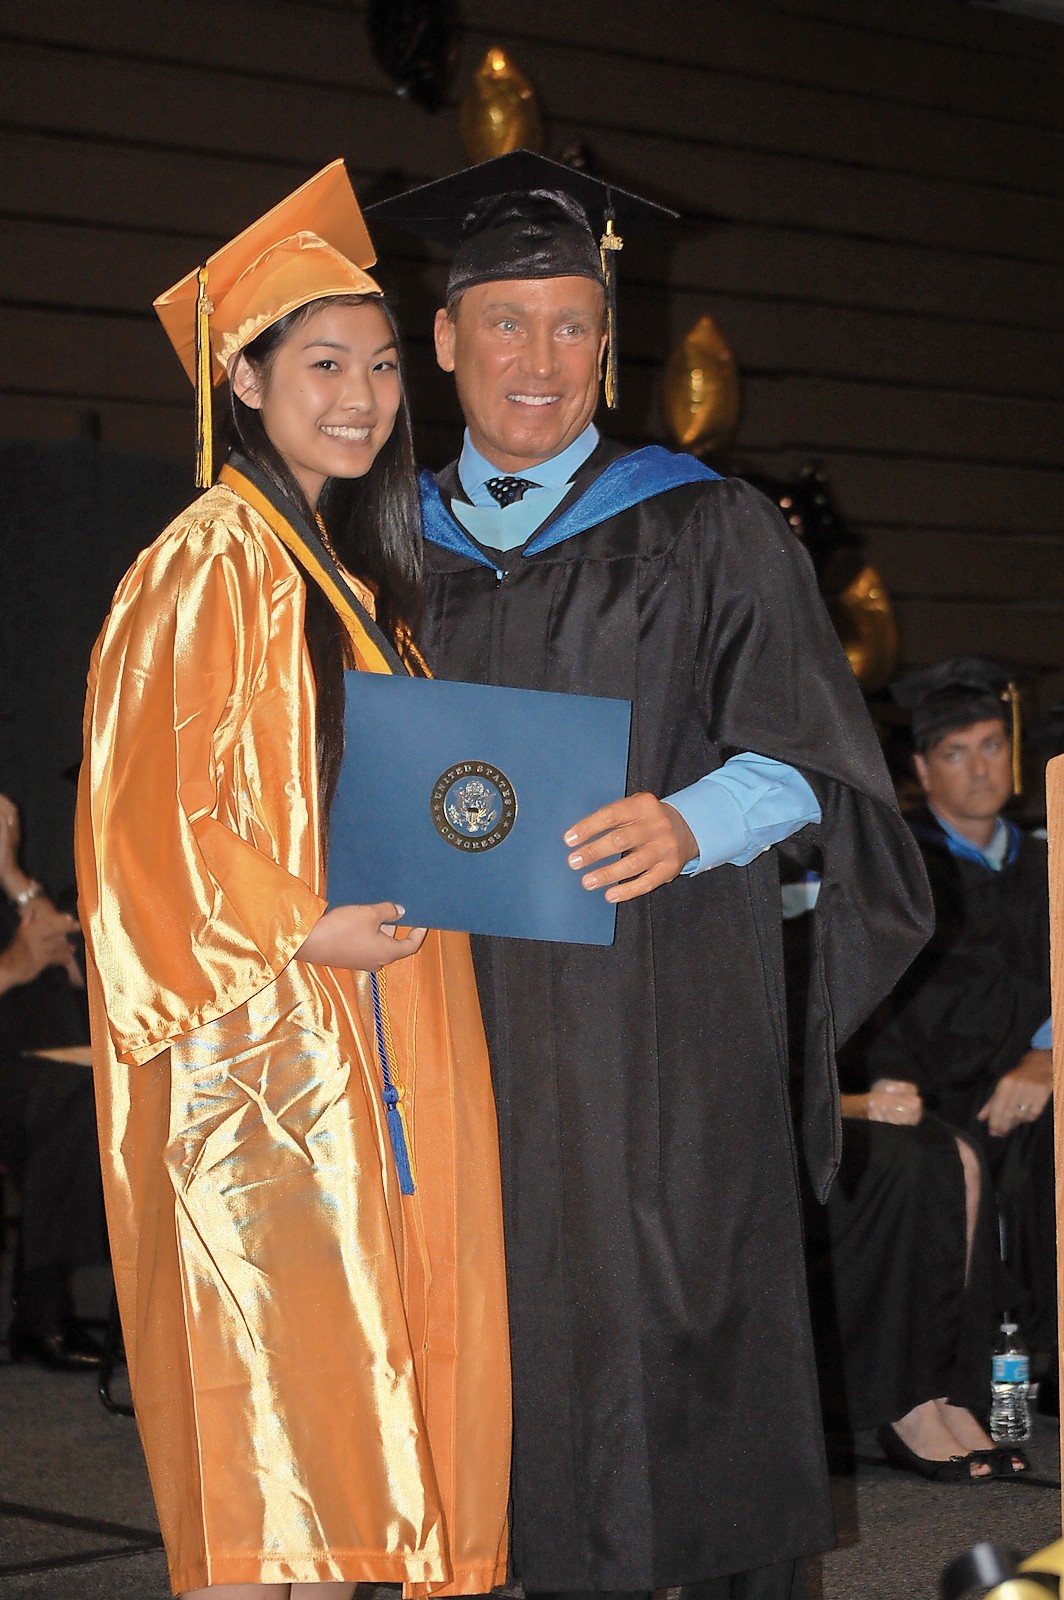 Salutatorian Sophia Liu, above left, was recognized for her achievement by Assistant Principal Jim Brown.